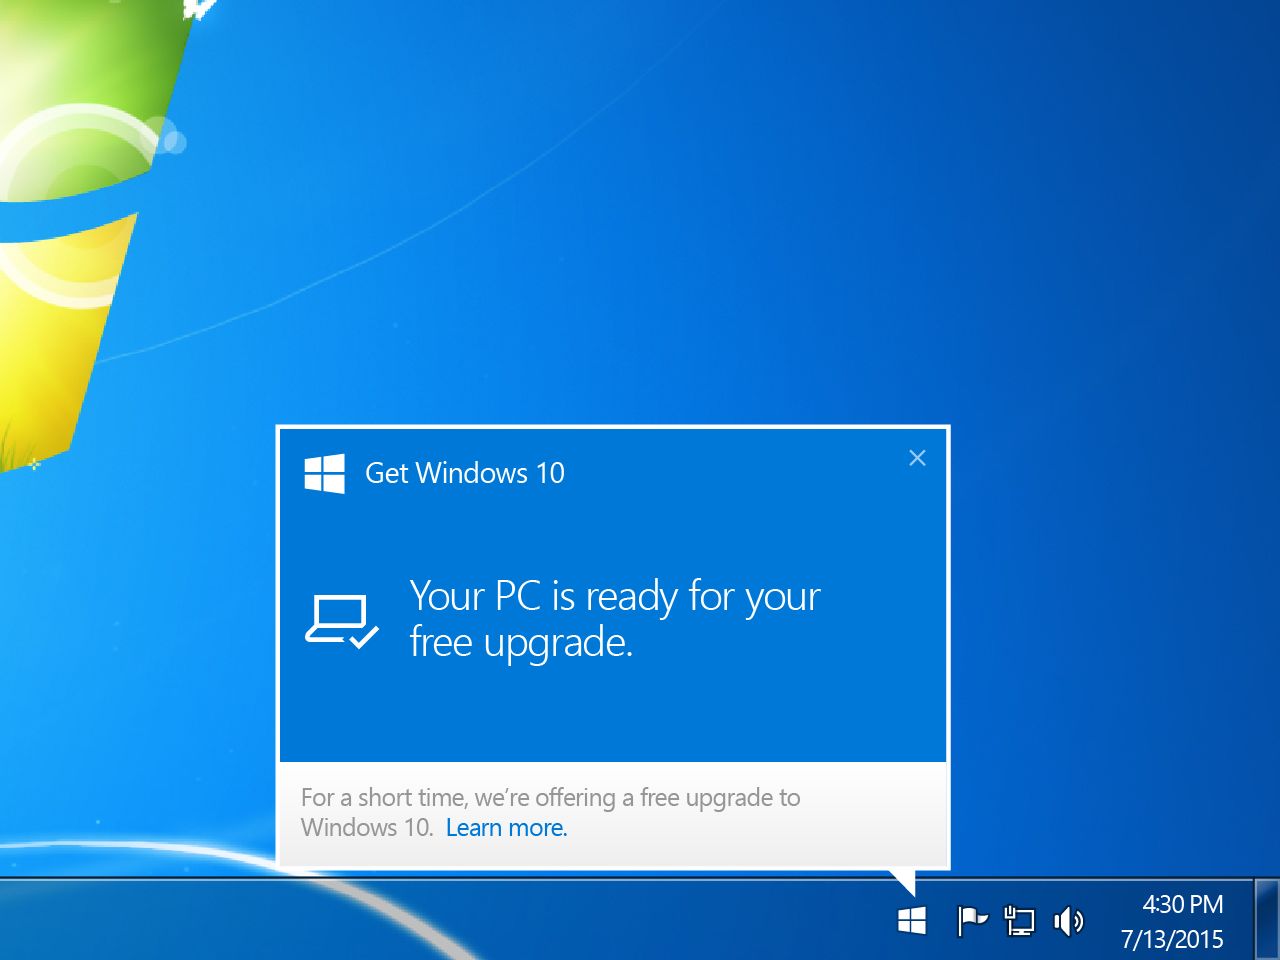 download free windows 10 upgrade from windows 7